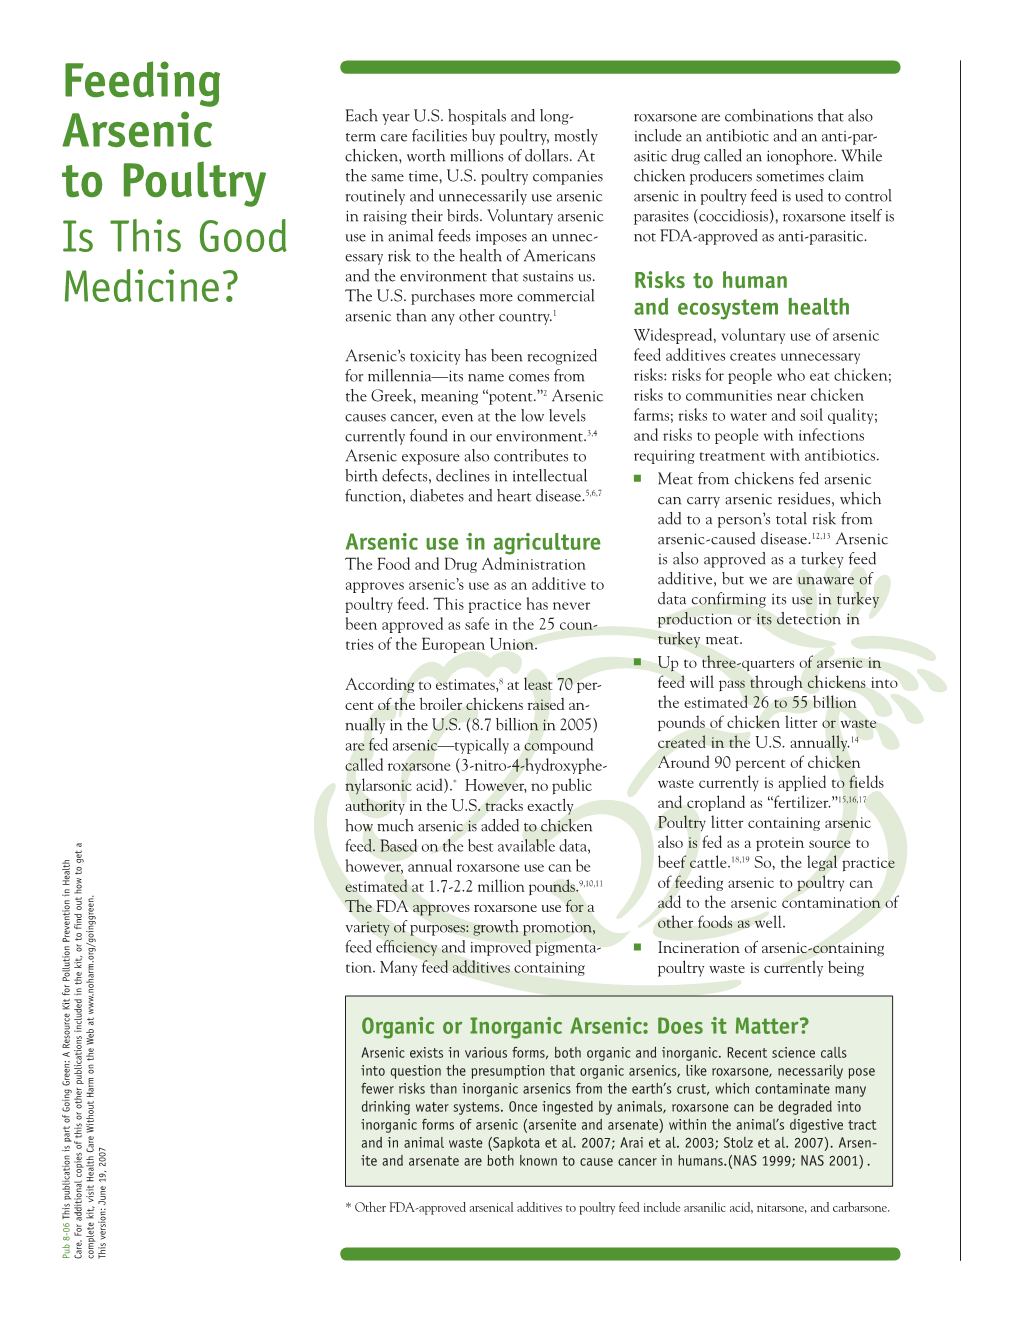 Feeding Arsenic to Poultry Can the FDA Approves Roxarsone Use for a Add to the Arsenic Contamination of Variety of Purposes: Growth Promotion, Other Foods As Well